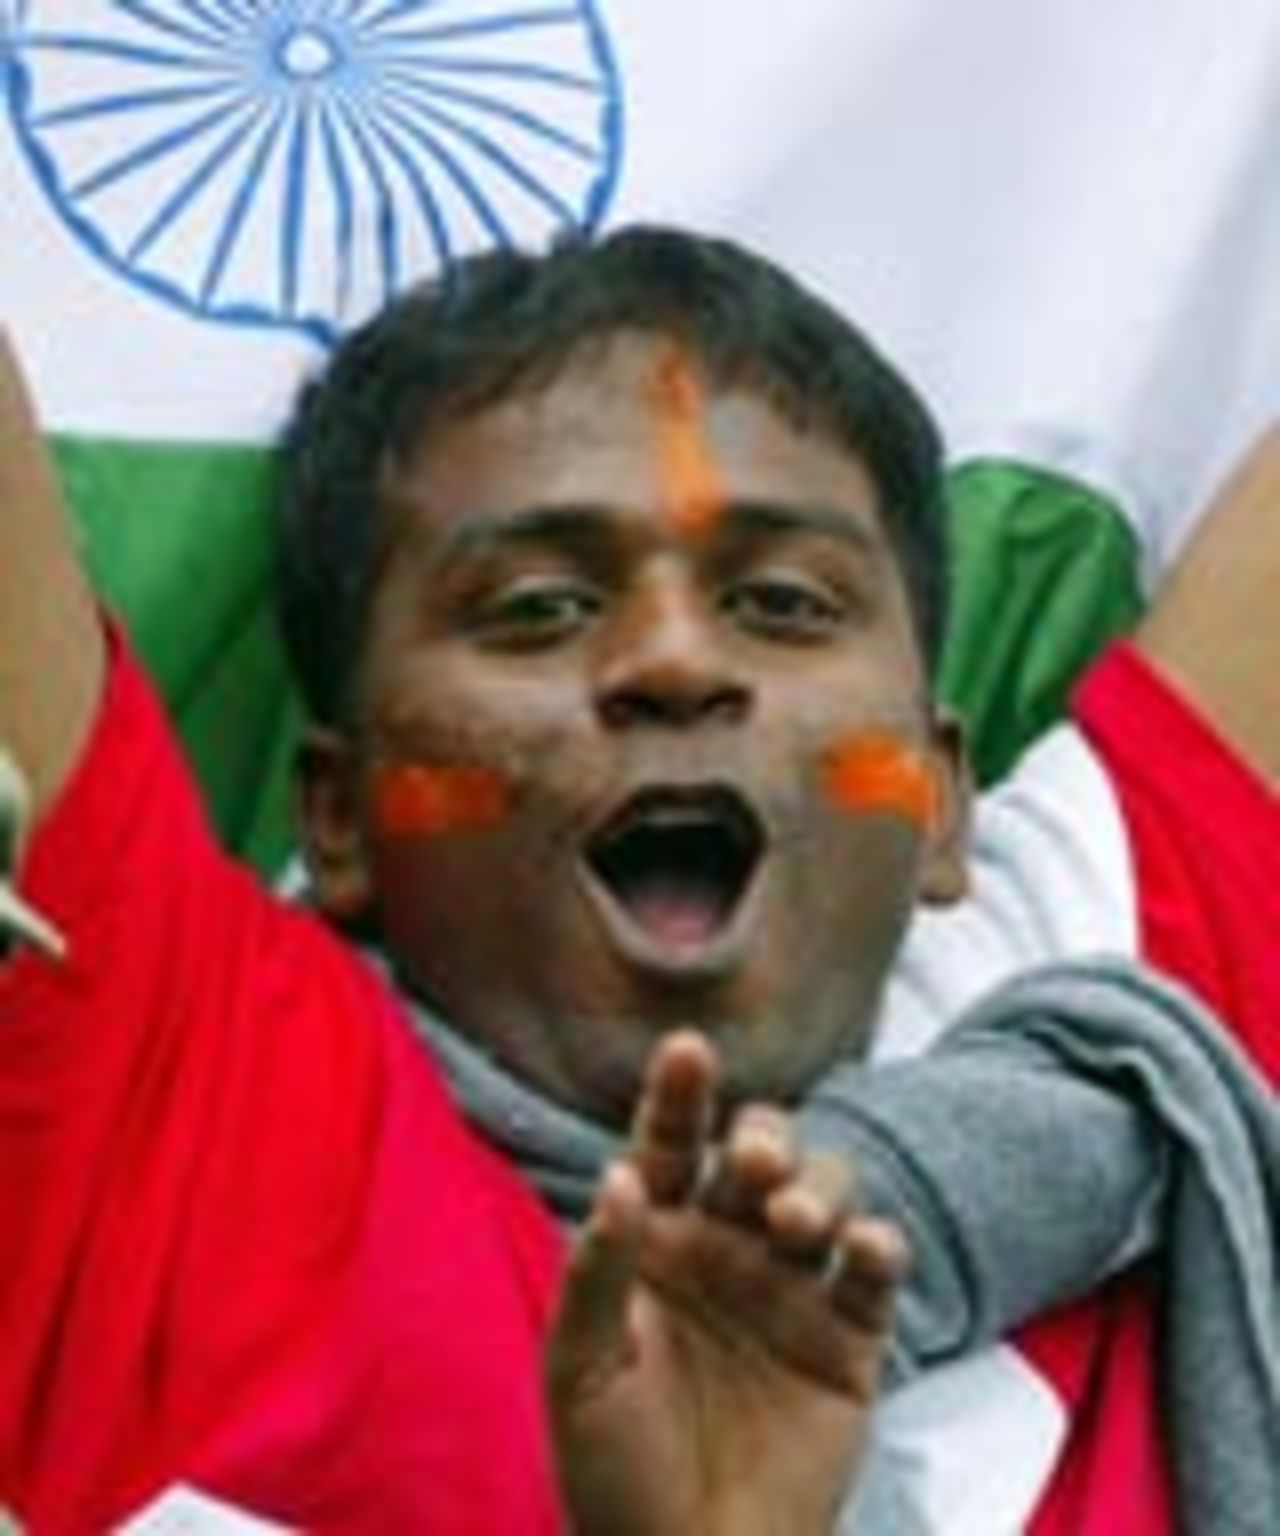 An Indian fan waits for play to start, India v Pakistan, 1st match, Videocon Cup, Amstelveen, August 21, 2004